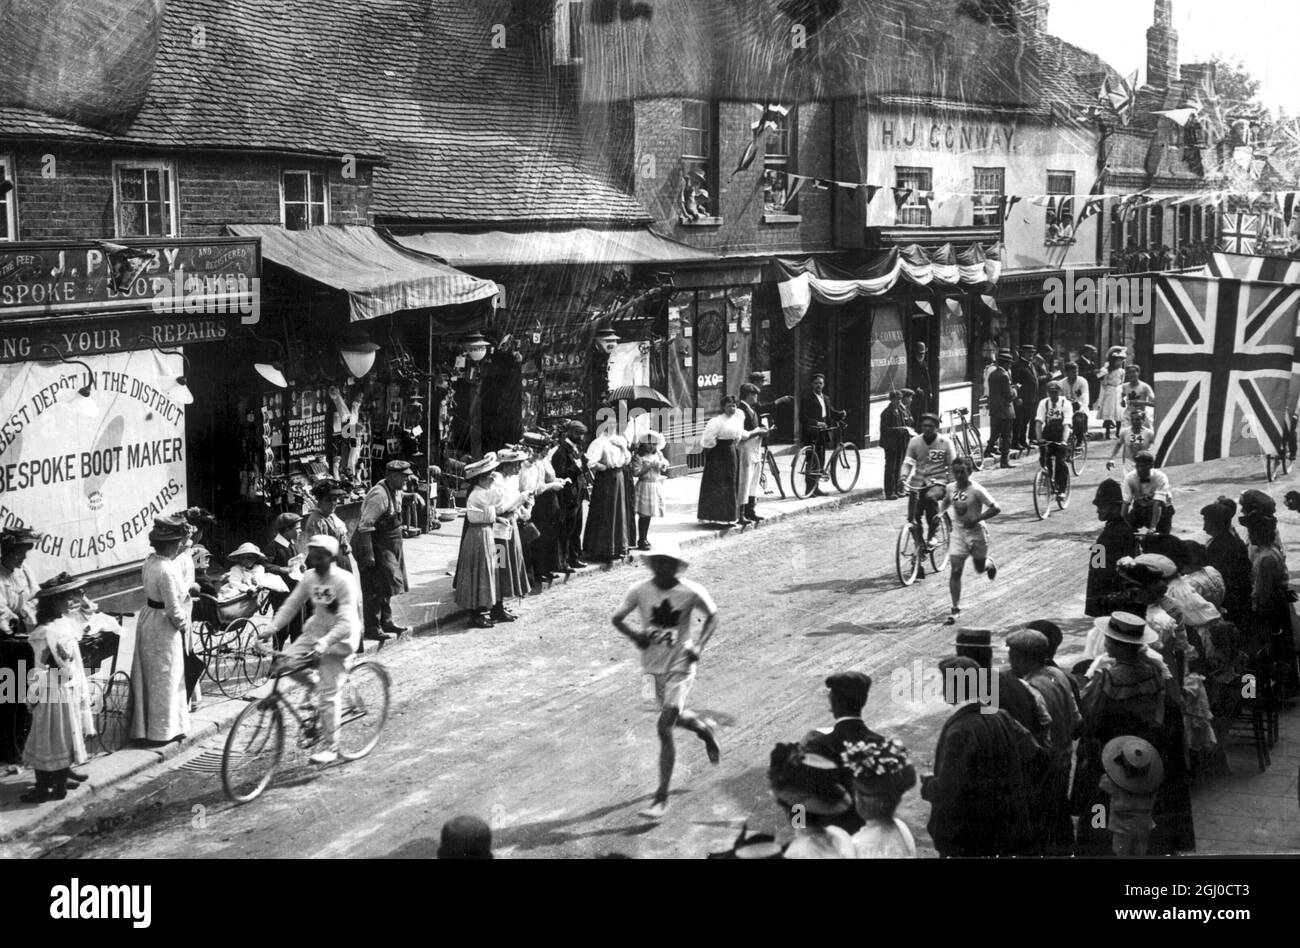 Olympic Games London 1908 View of the marathon passing through an English town Stock Photo